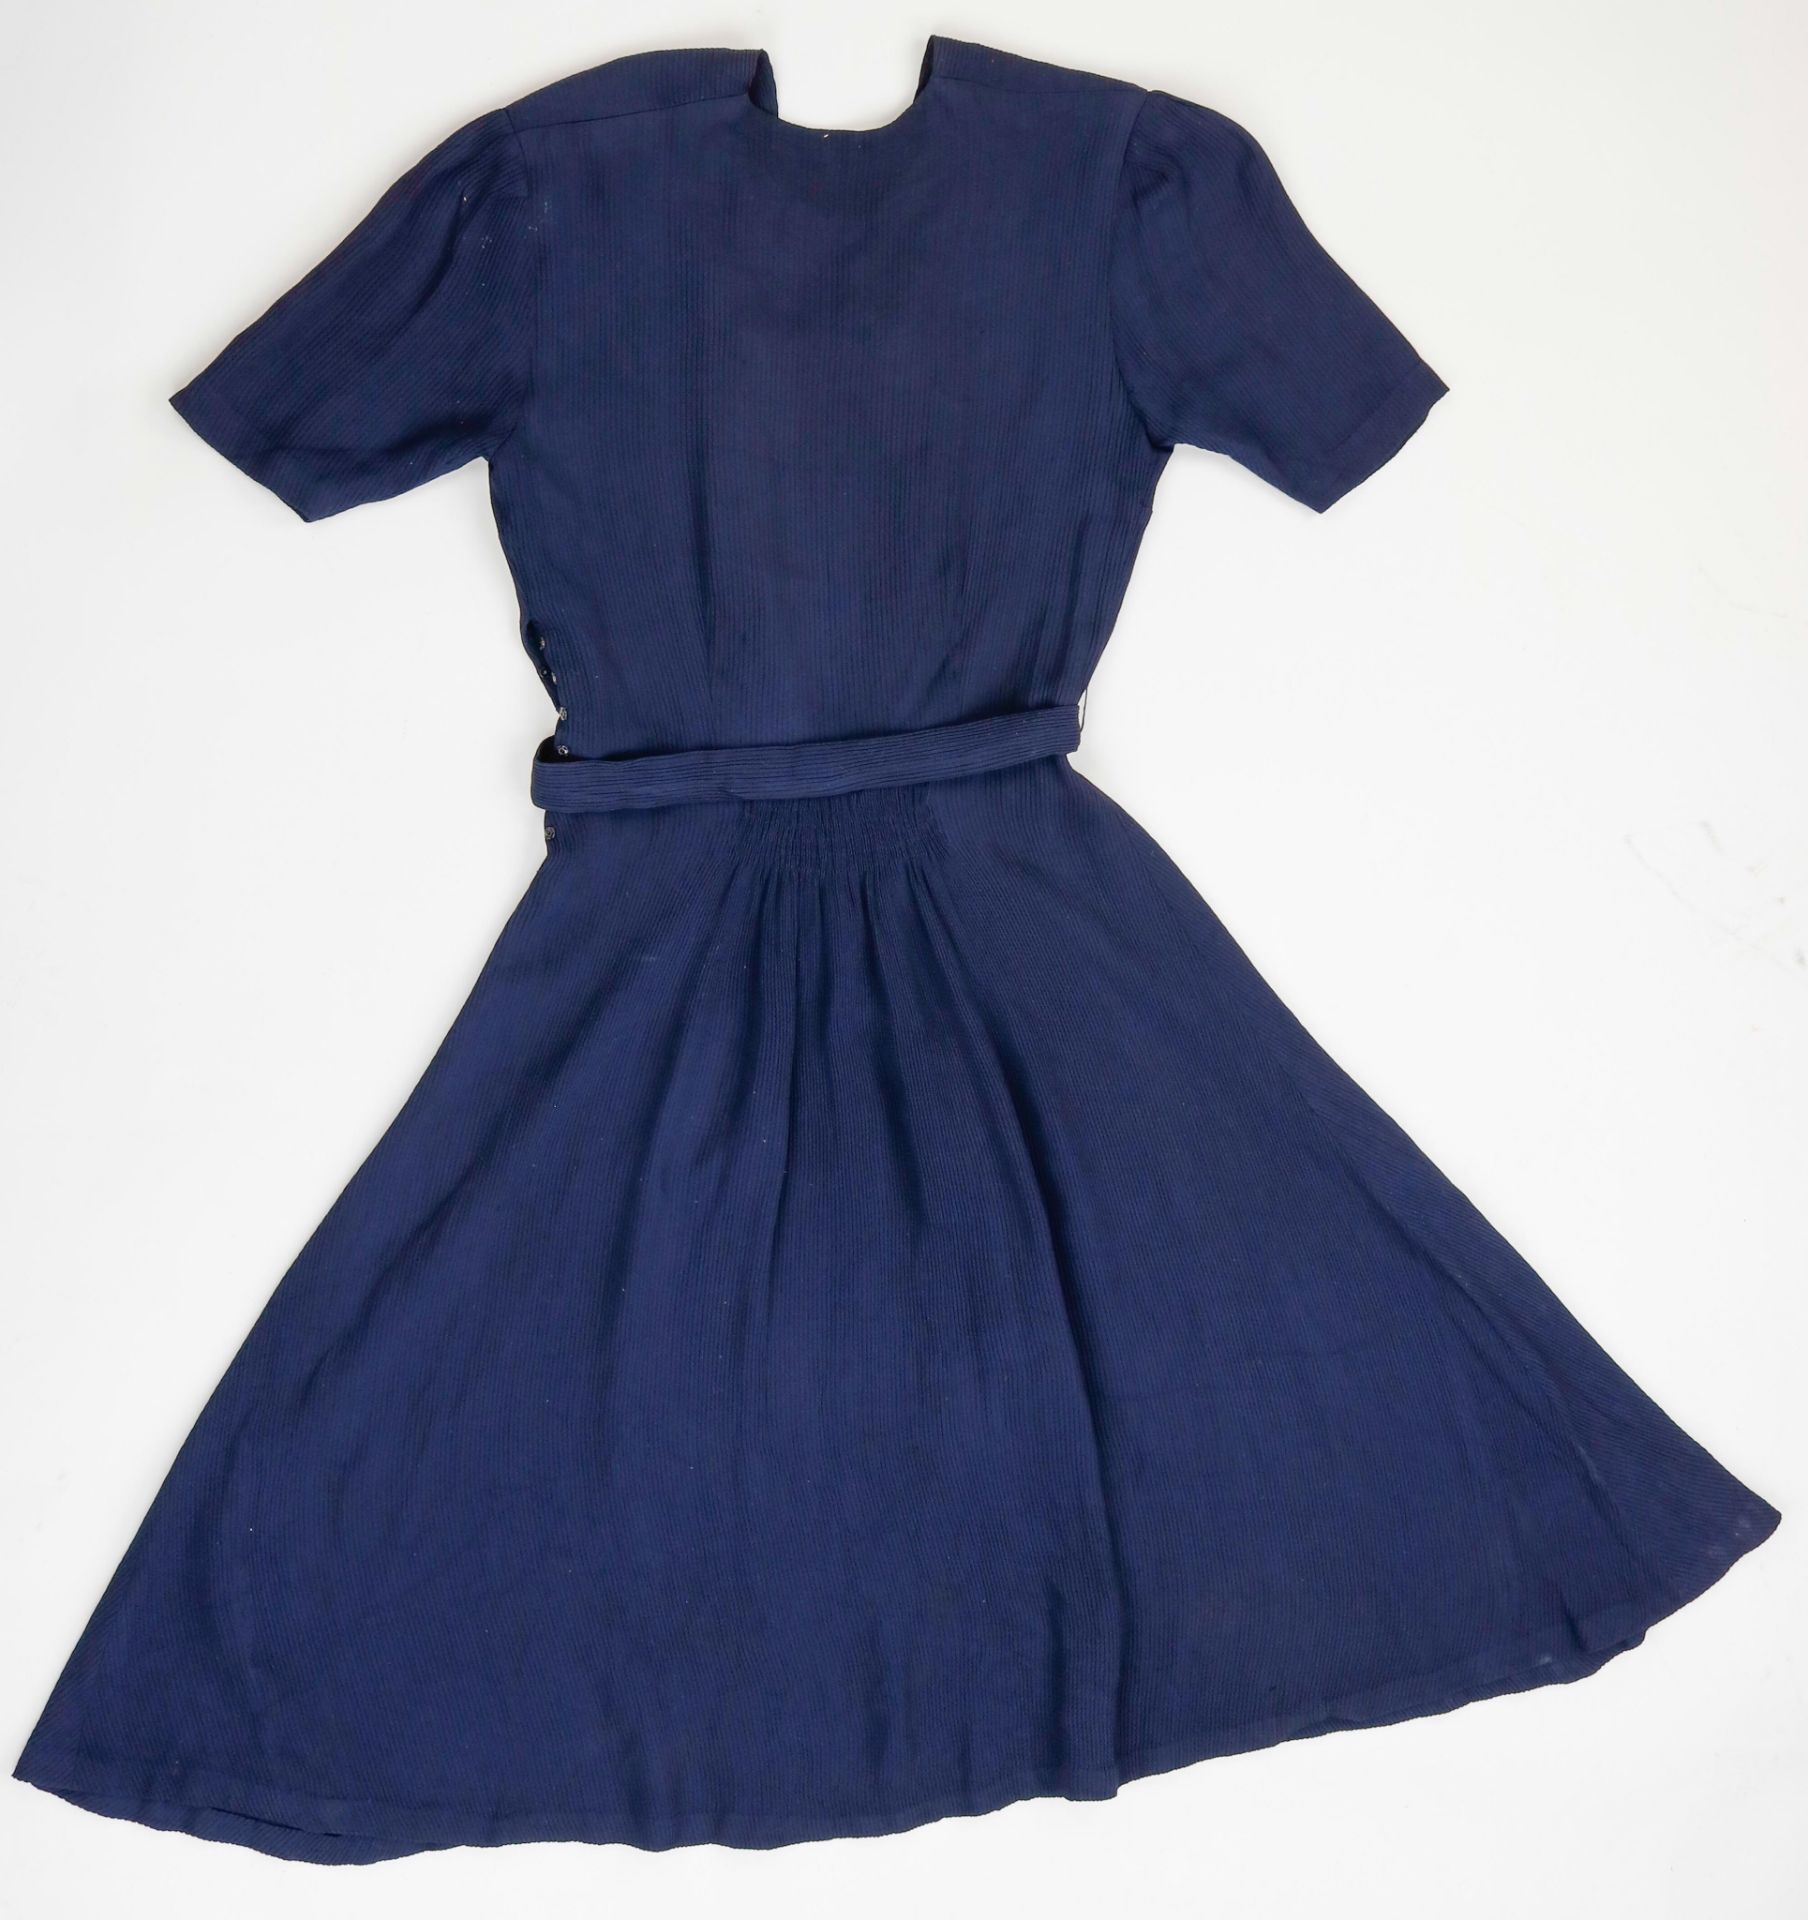 EVA BRAUN'S BELTED BLUE DRESS WITH INITIALED NAME TAG - Image 2 of 5